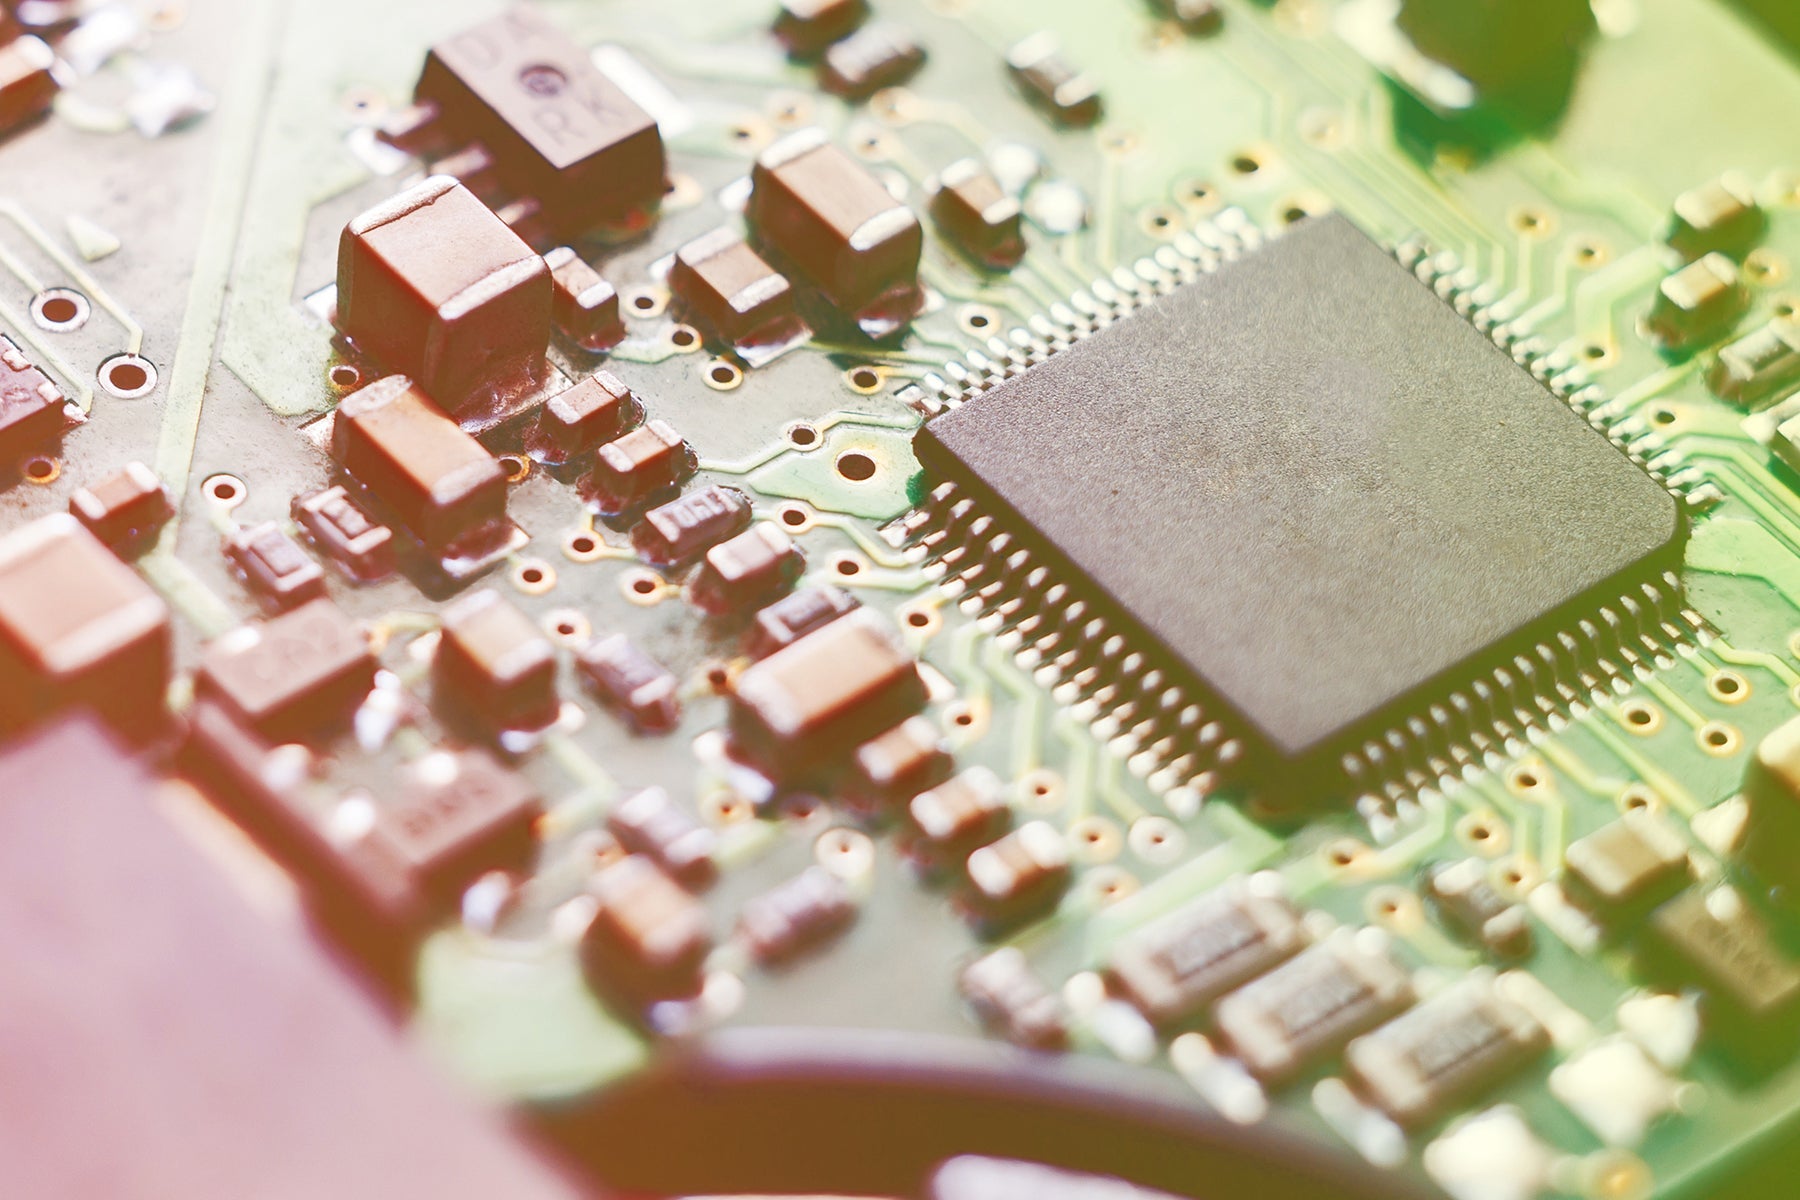 A close up of an electronic circuit board.